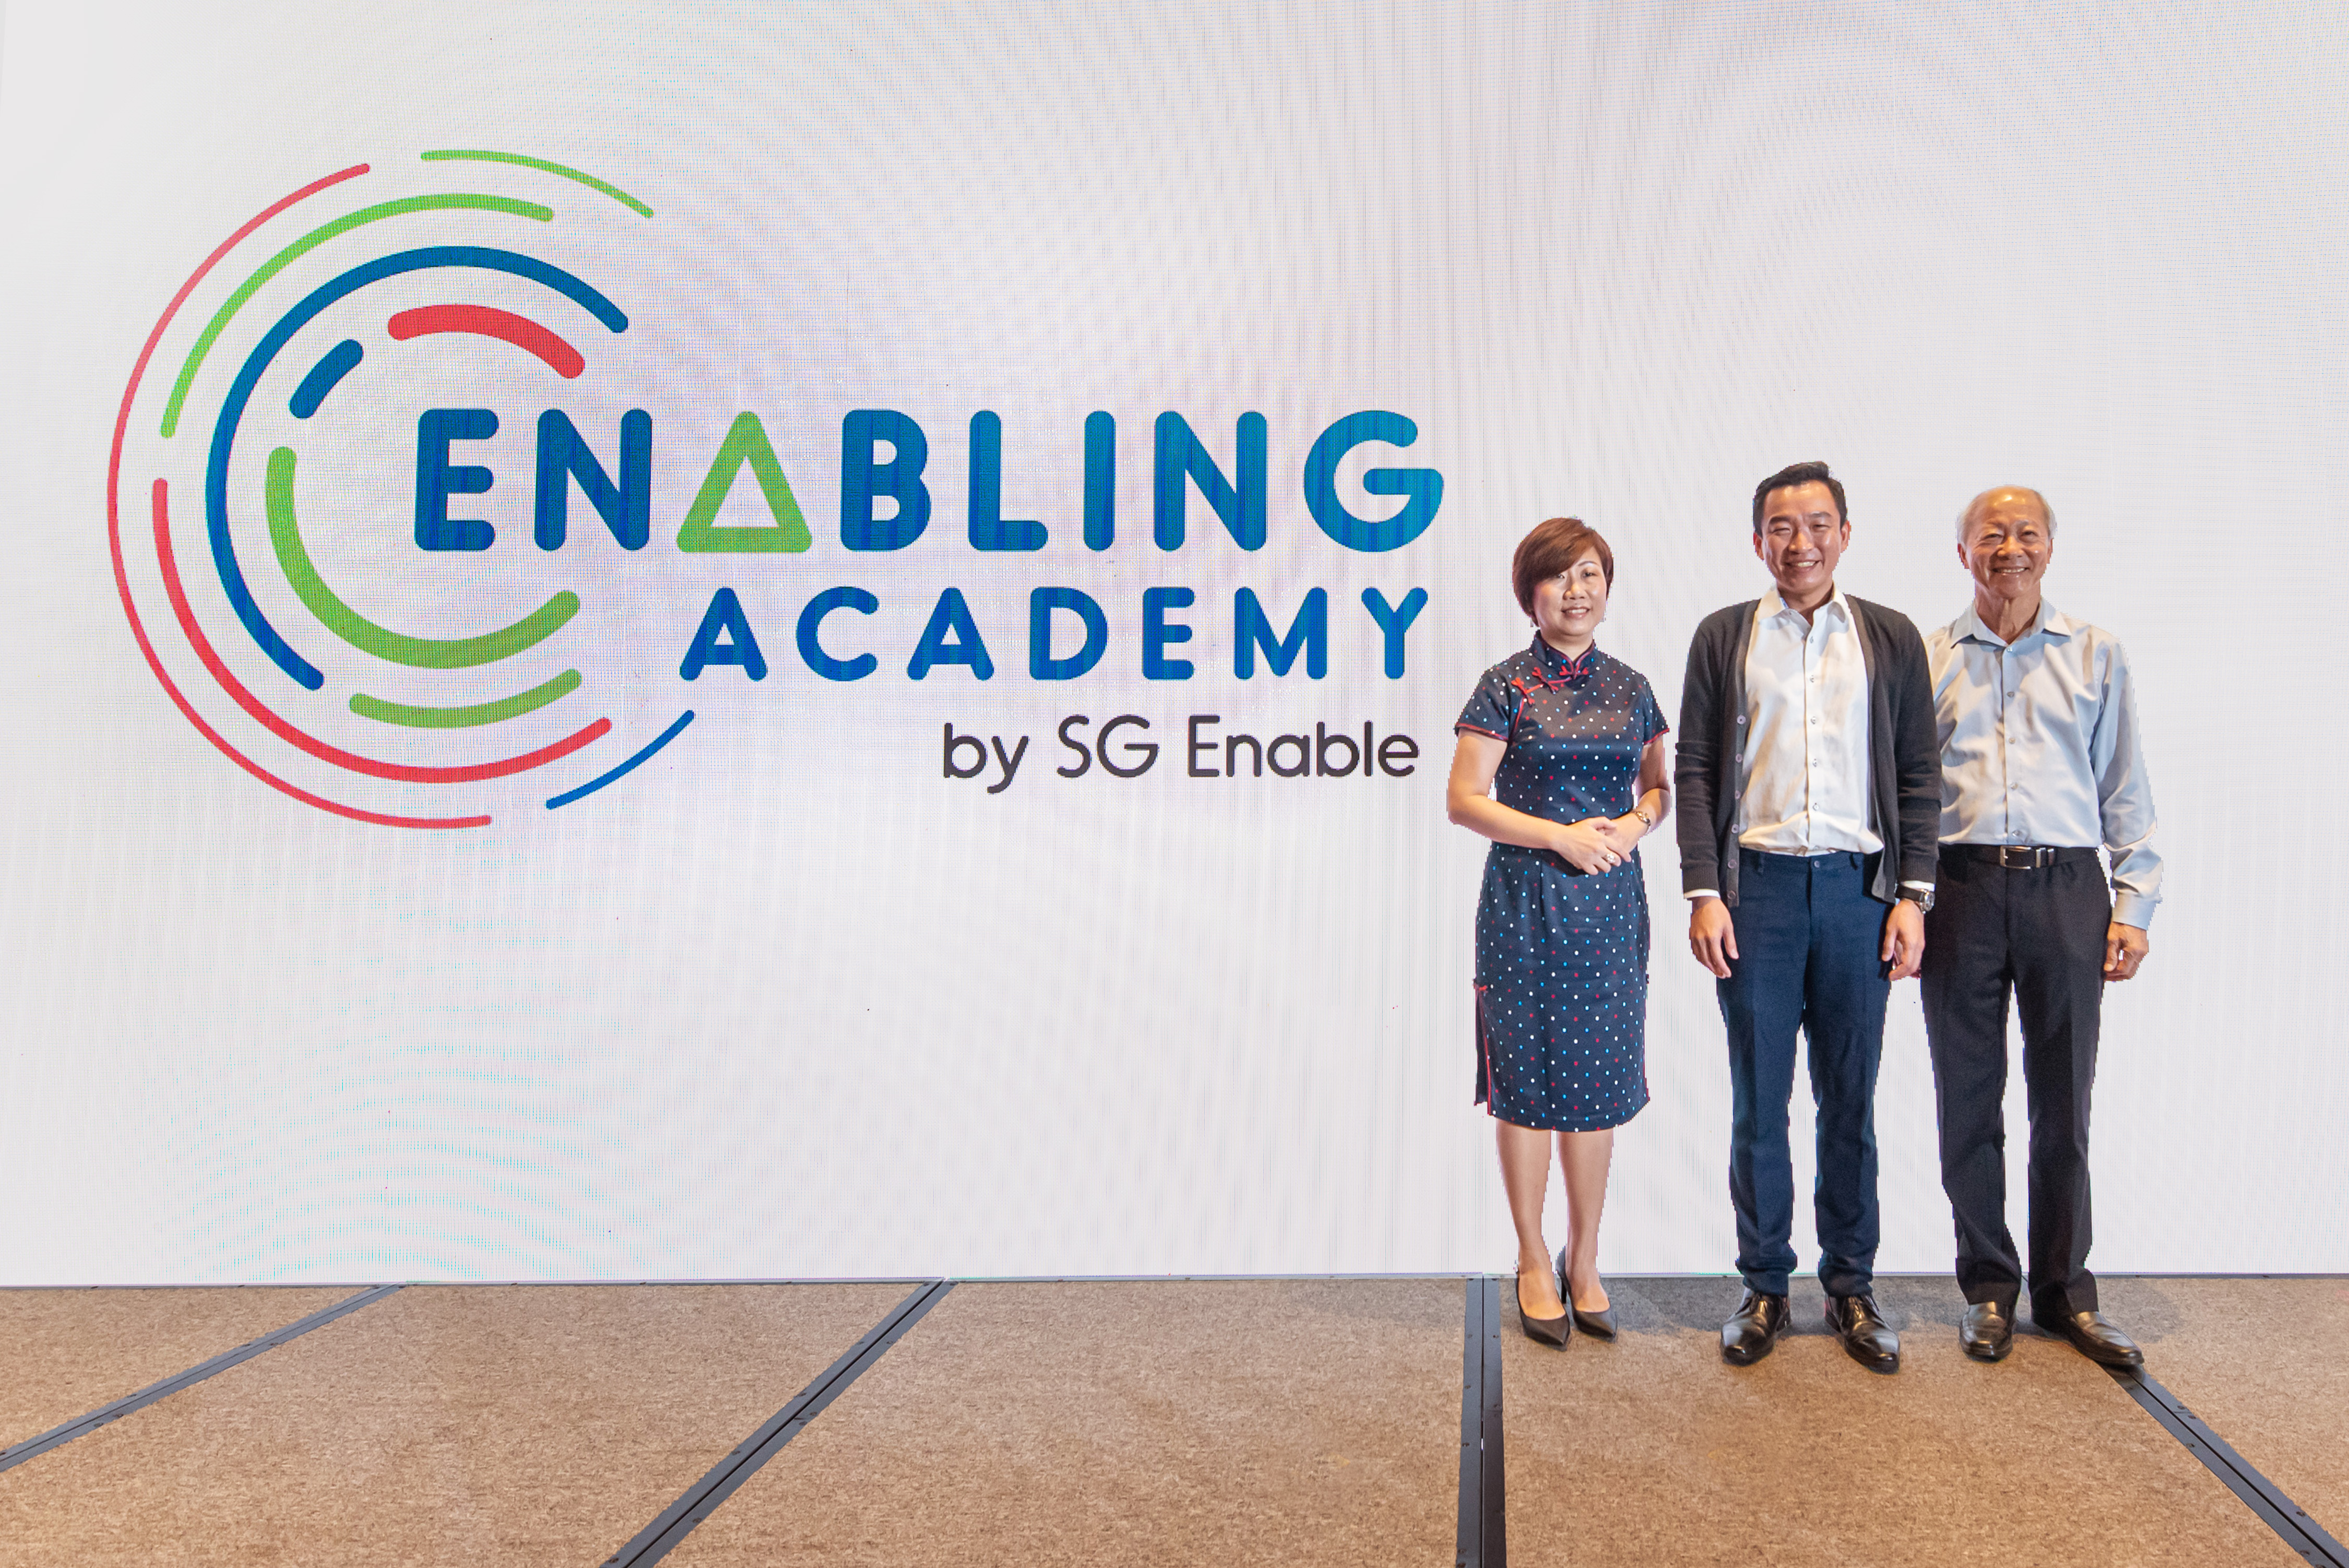 SG Enable’s CEO, Ms Ku Geok Boon, Parliamentary Secretary Mr Eric Chua and SG Enable’s Chairman Mr Moses Lee standing against a screen that displays Enabling Academy’s logo.